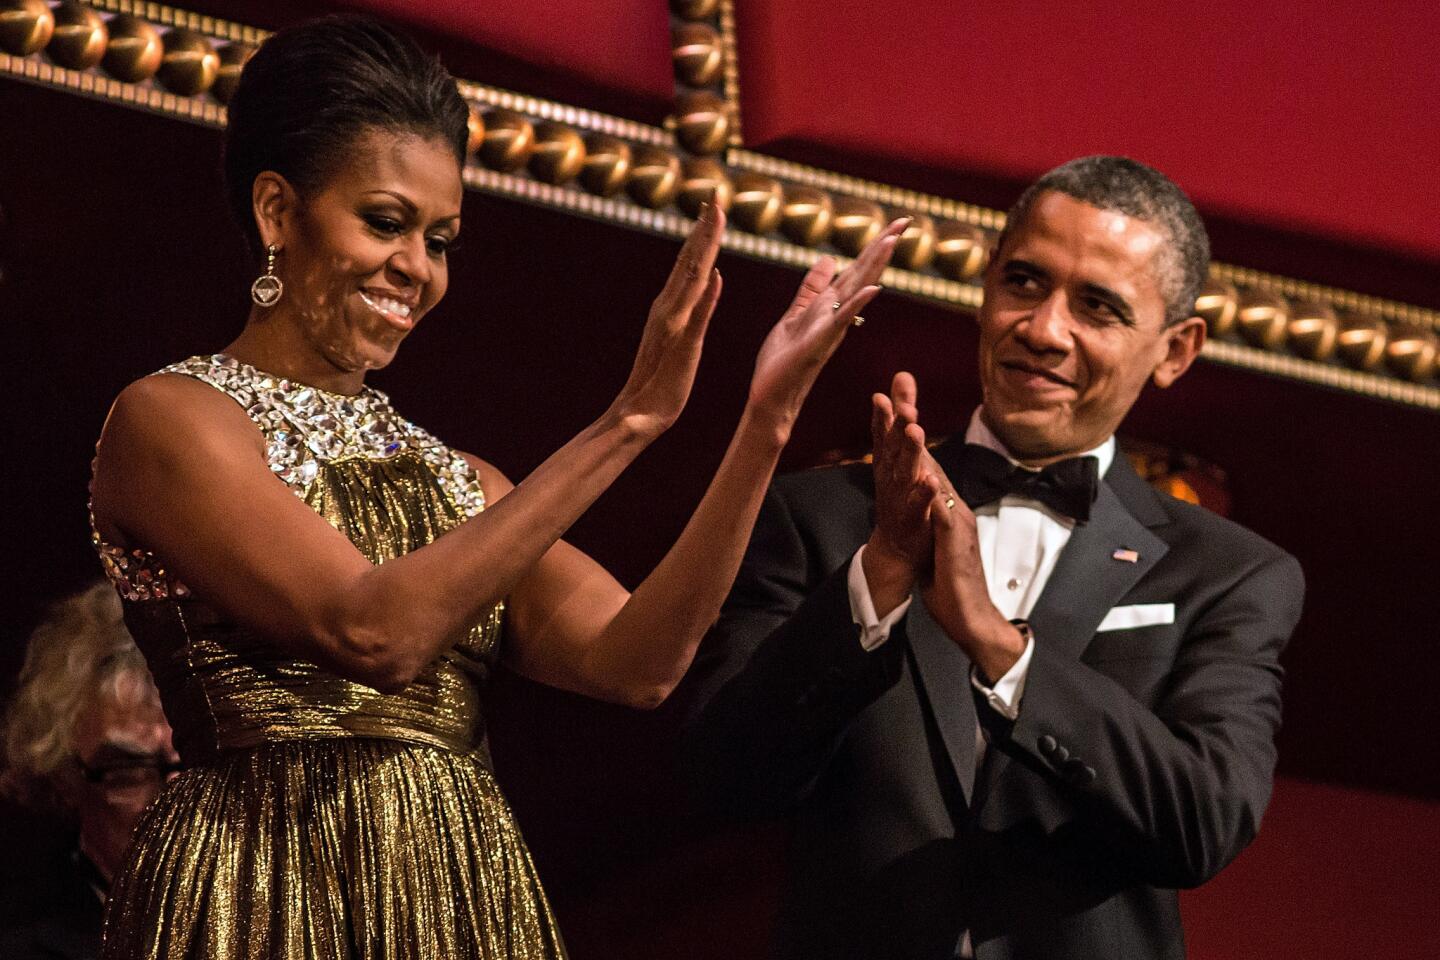 First Lady Michelle Obama's formal looks